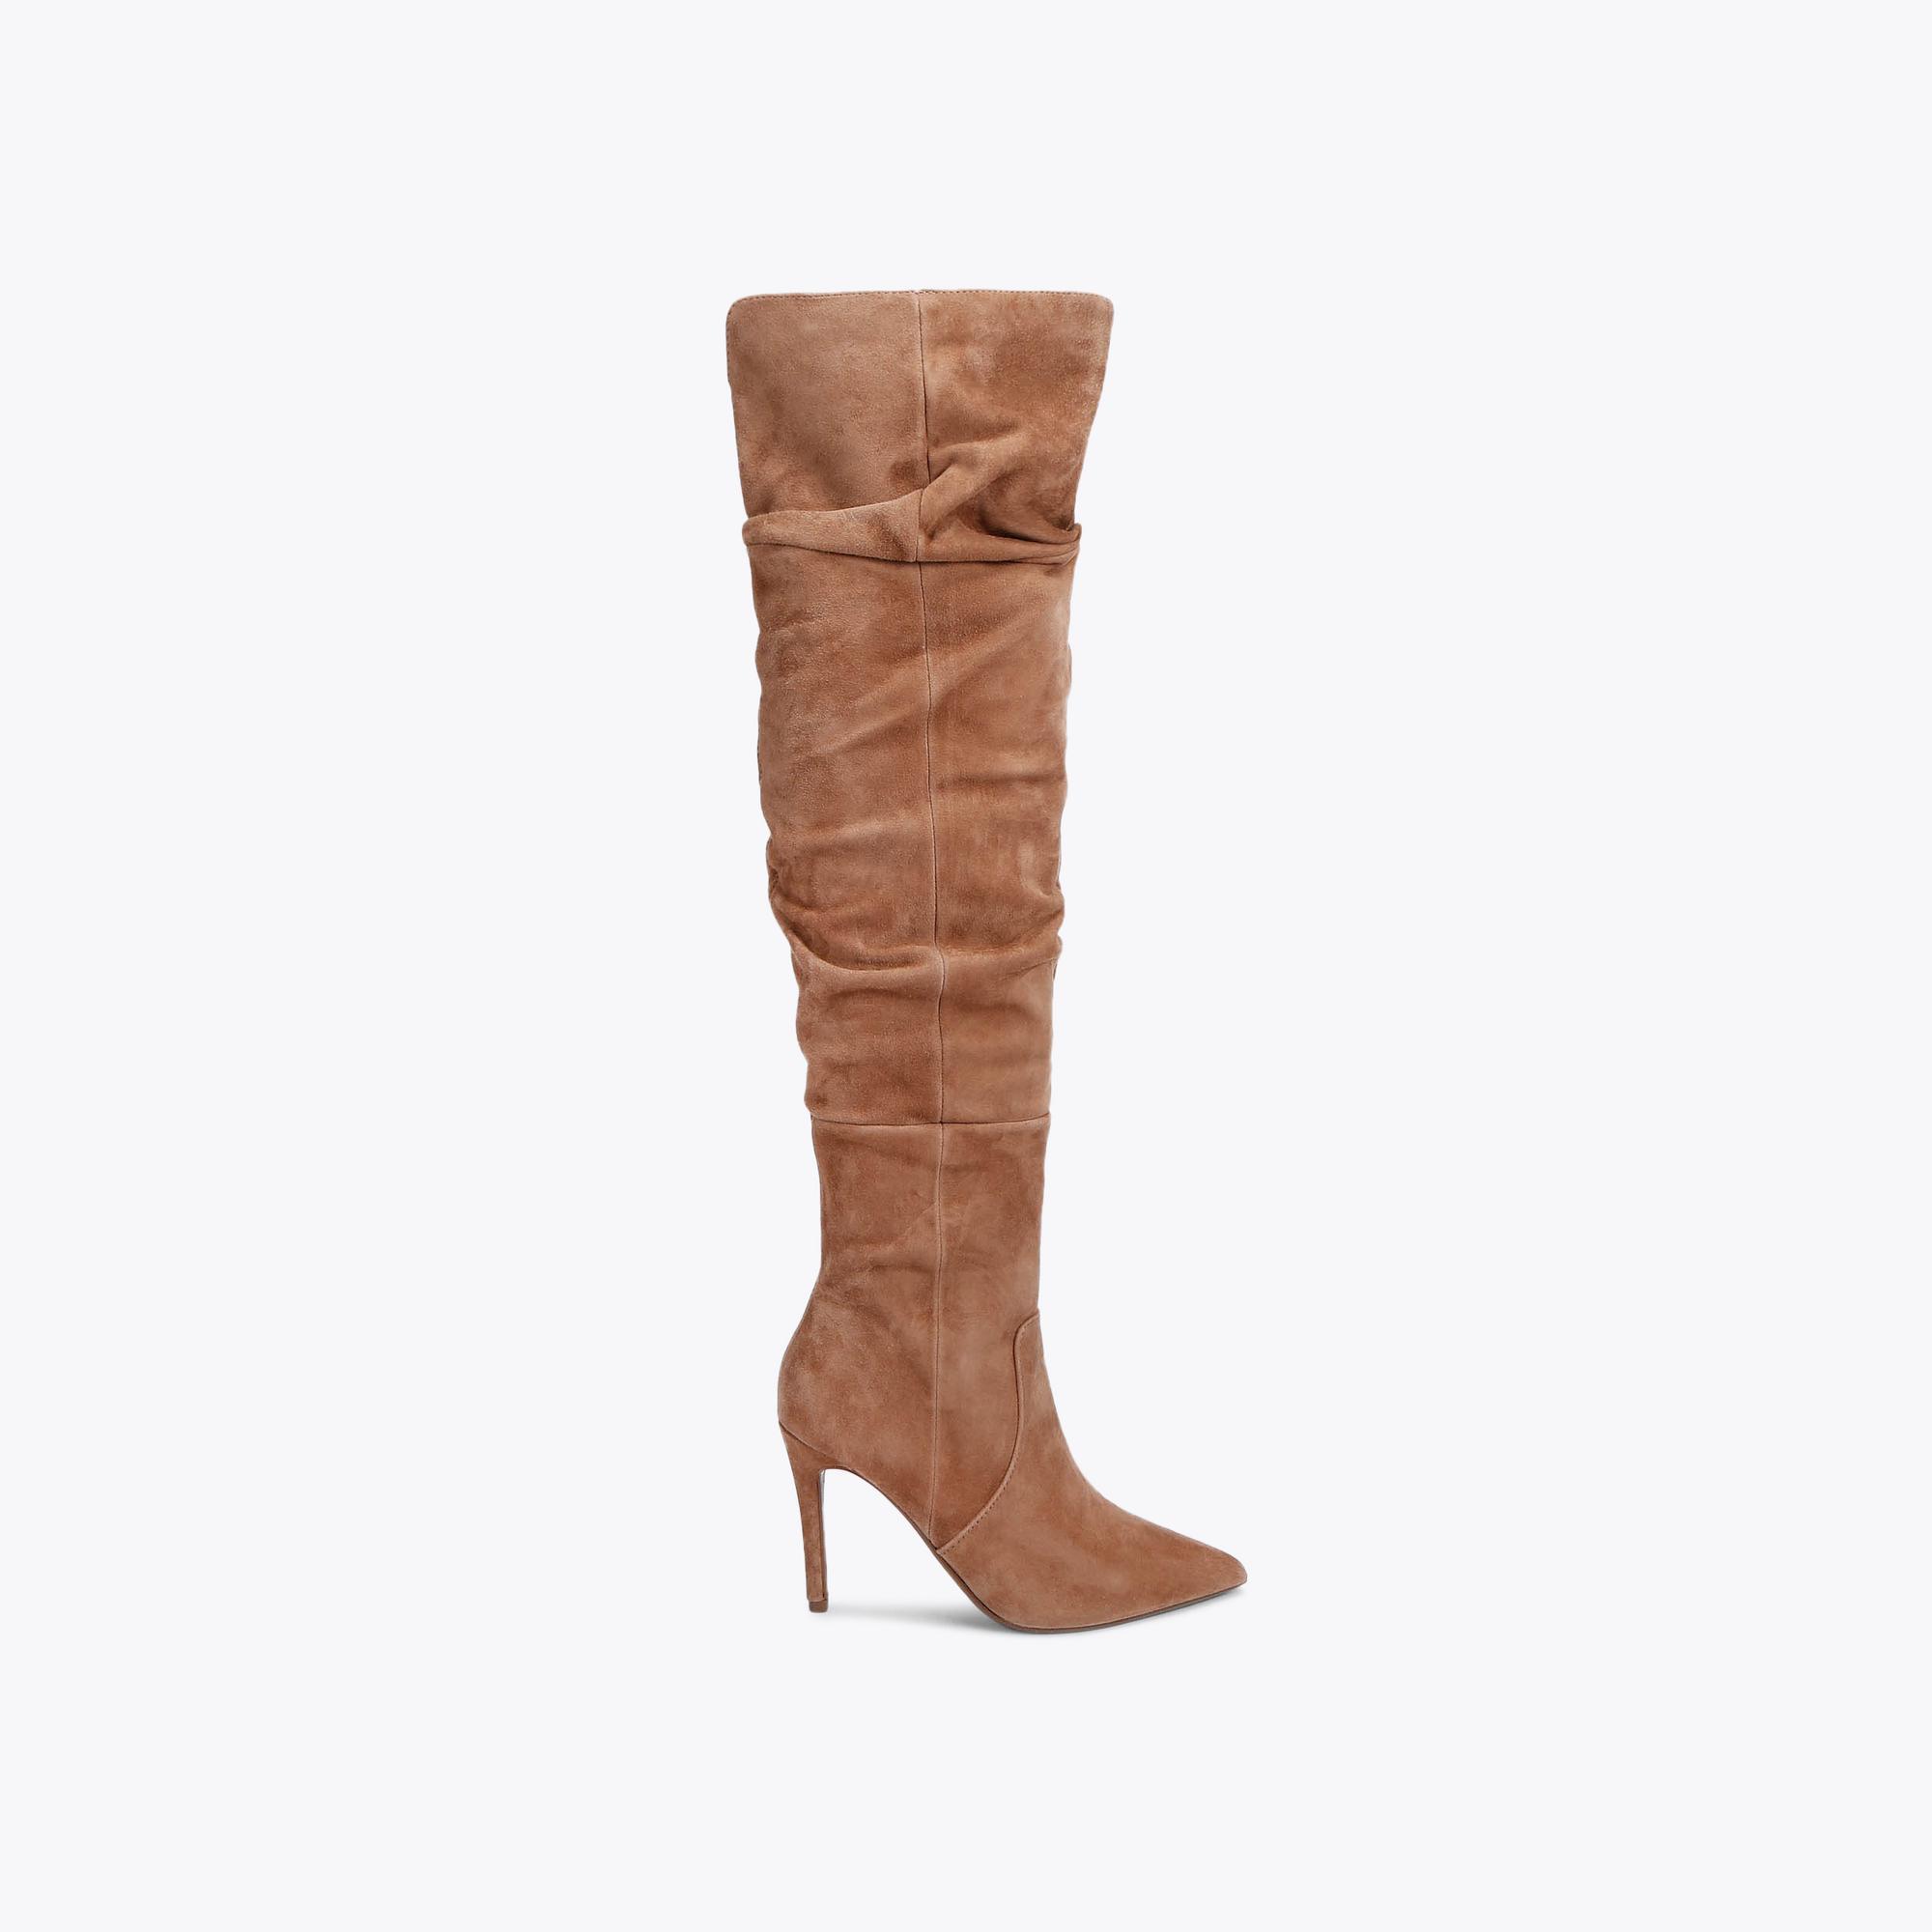 SPICY SLOUCH Tan Slouch Suede Knee High Boot by CARVELA